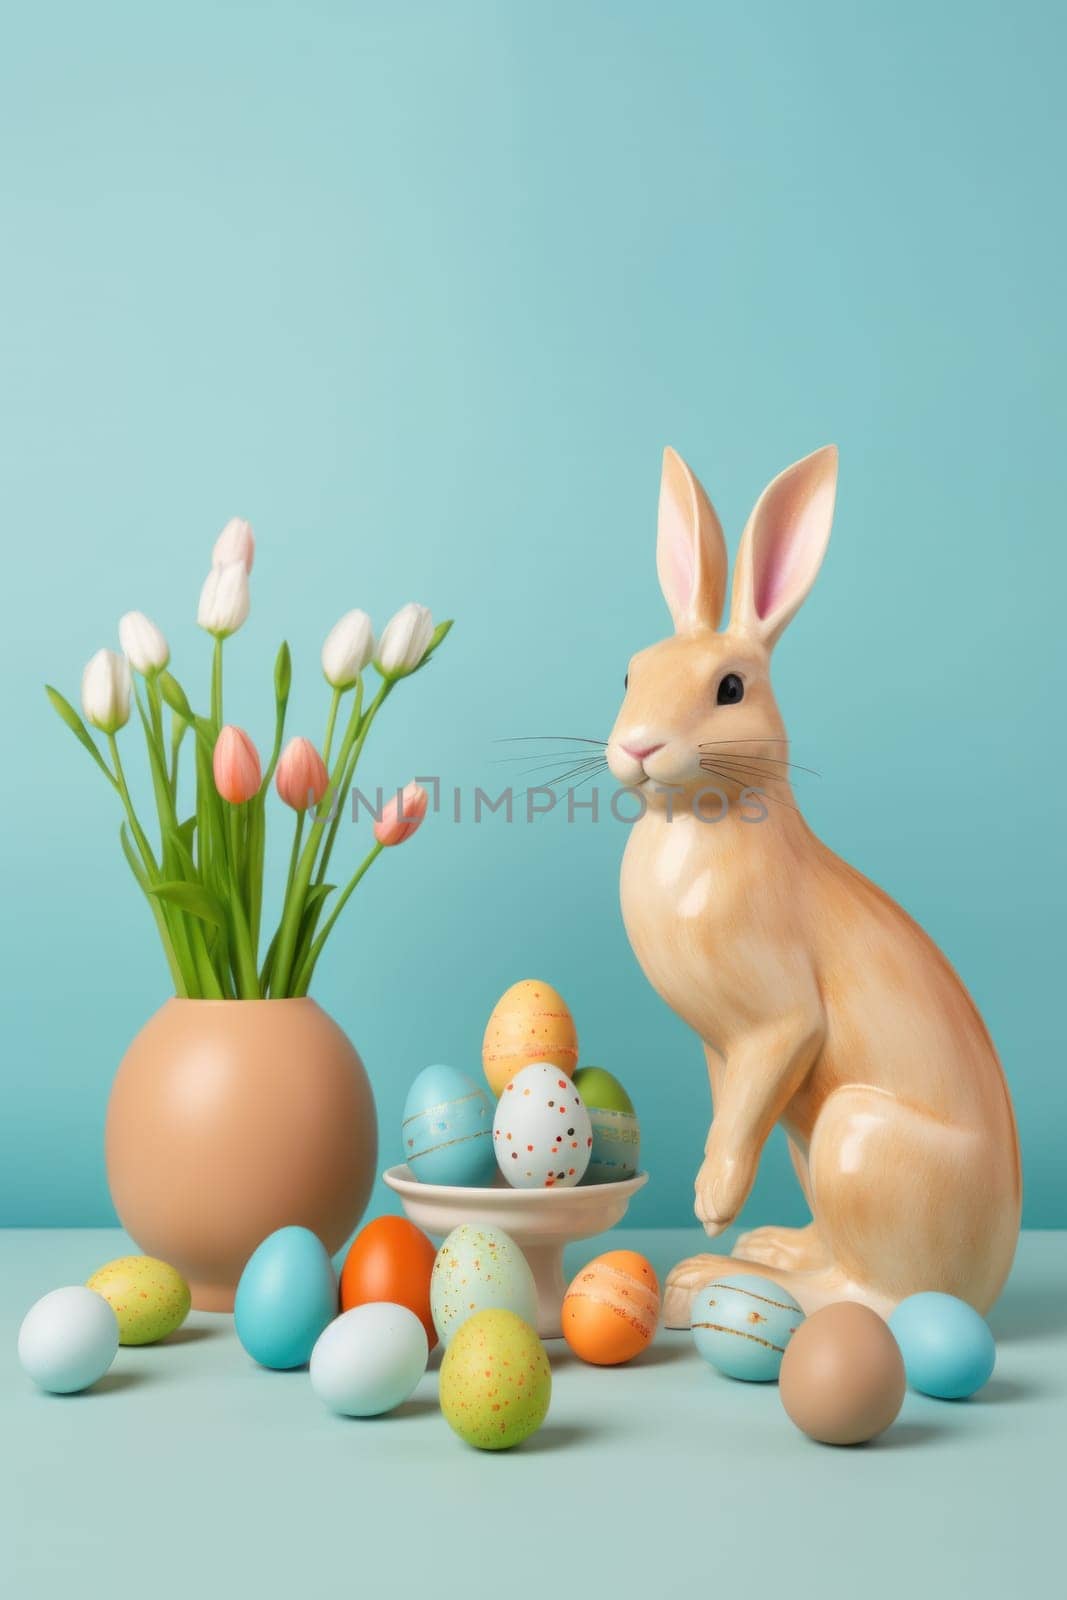 A bunny figurine sitting next to a vase filled with easter eggs